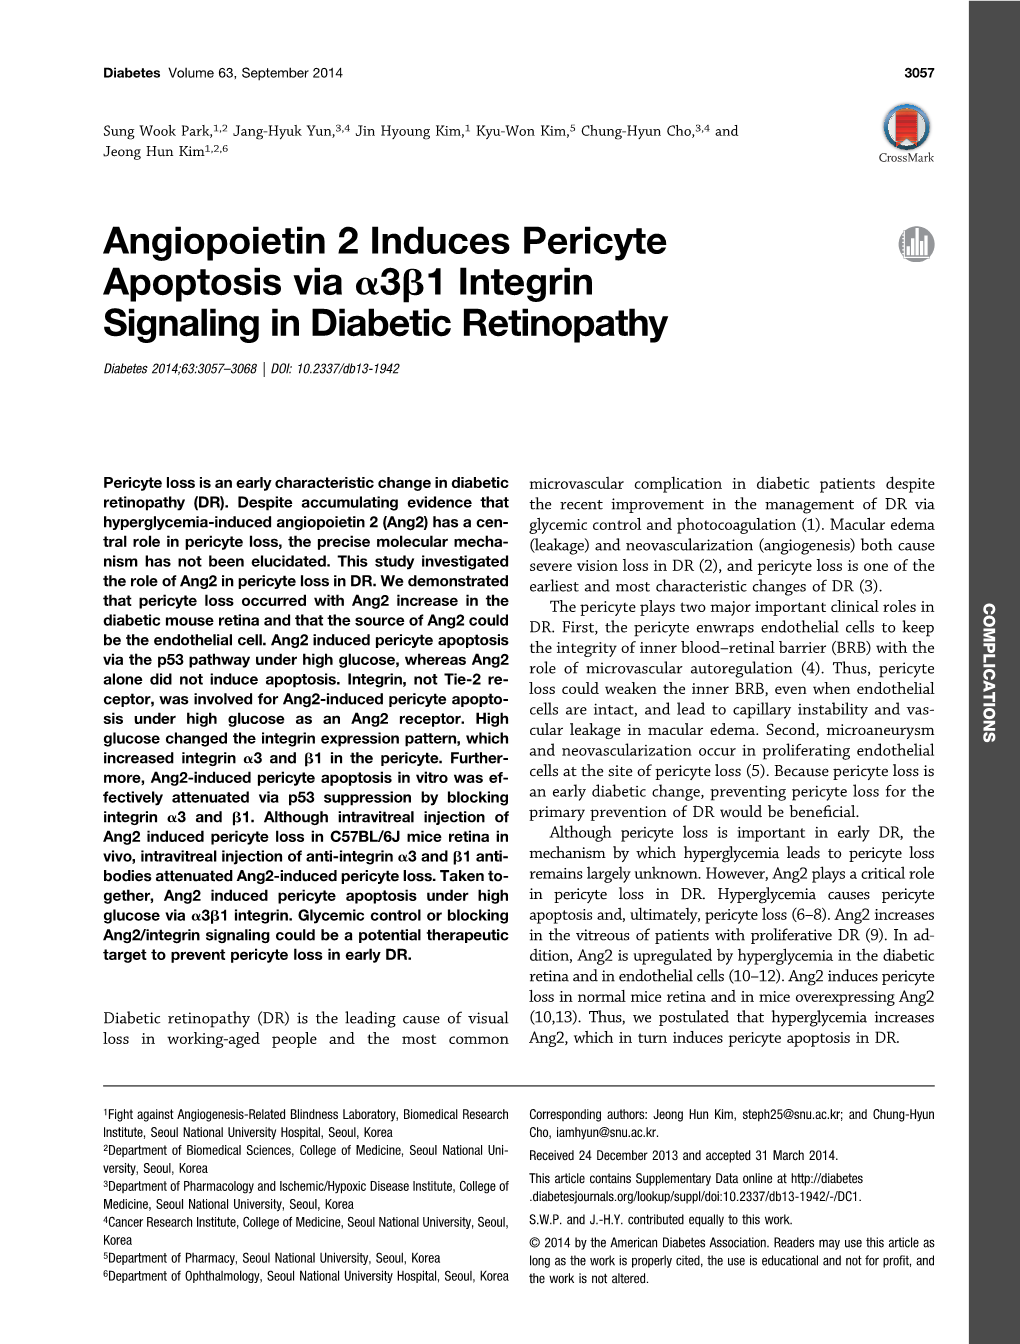 Angiopoietin 2 Induces Pericyte Apoptosis Via A3b1 Integrin Signaling in Diabetic Retinopathy